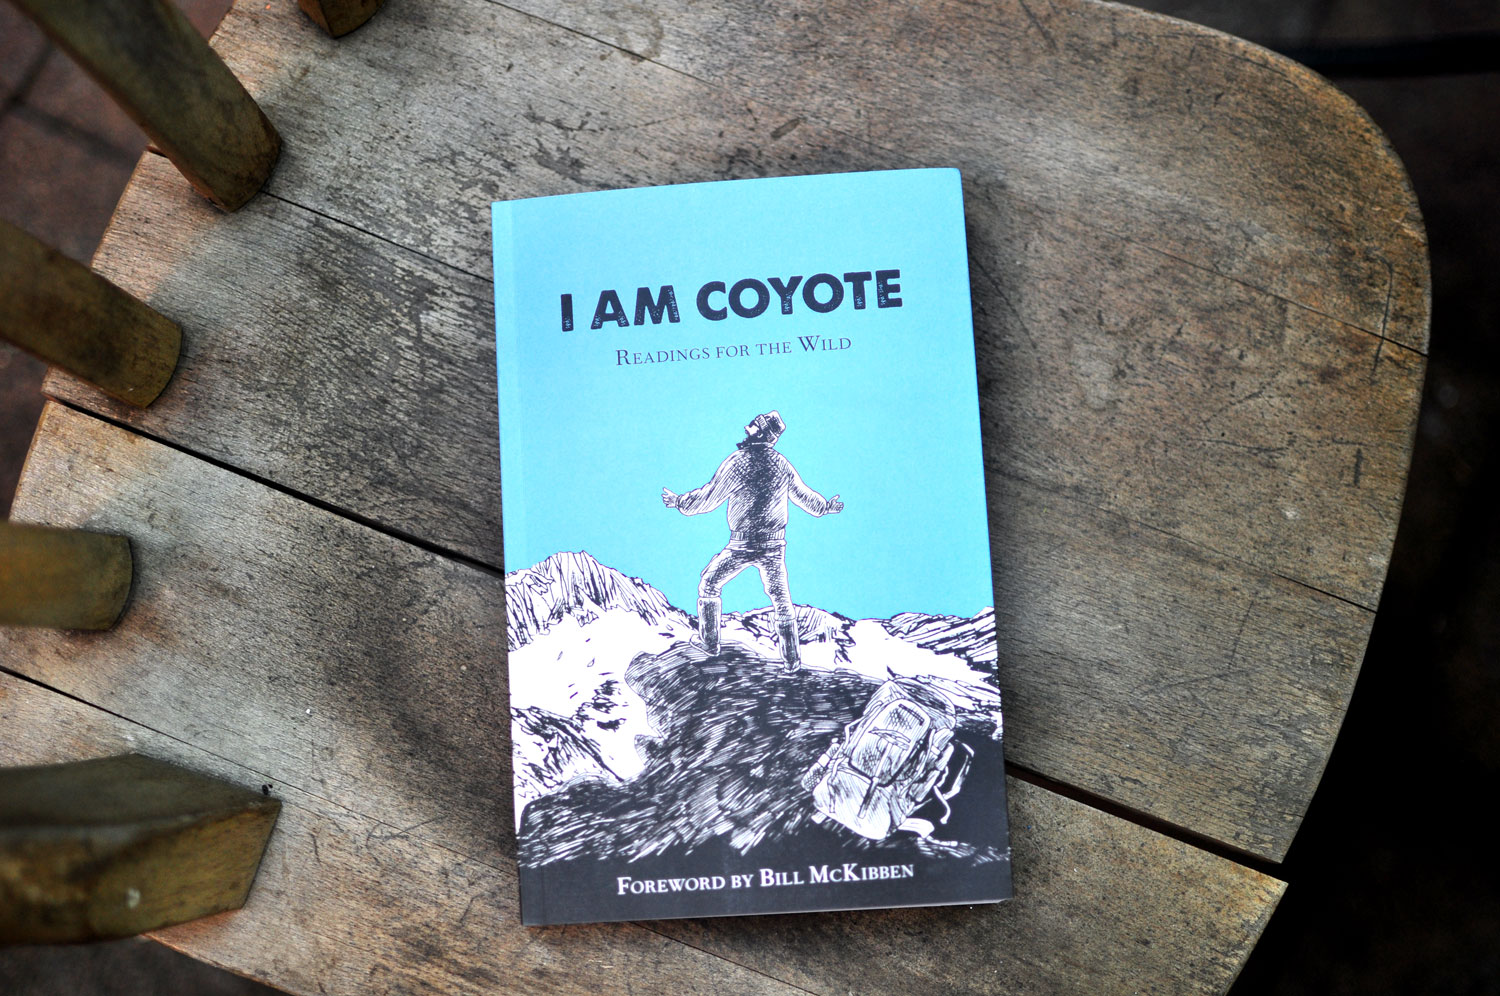 Cover of the I AM COYOTE: Readings for the Wild book with an illustration of a man on top of a mountain yelling out.